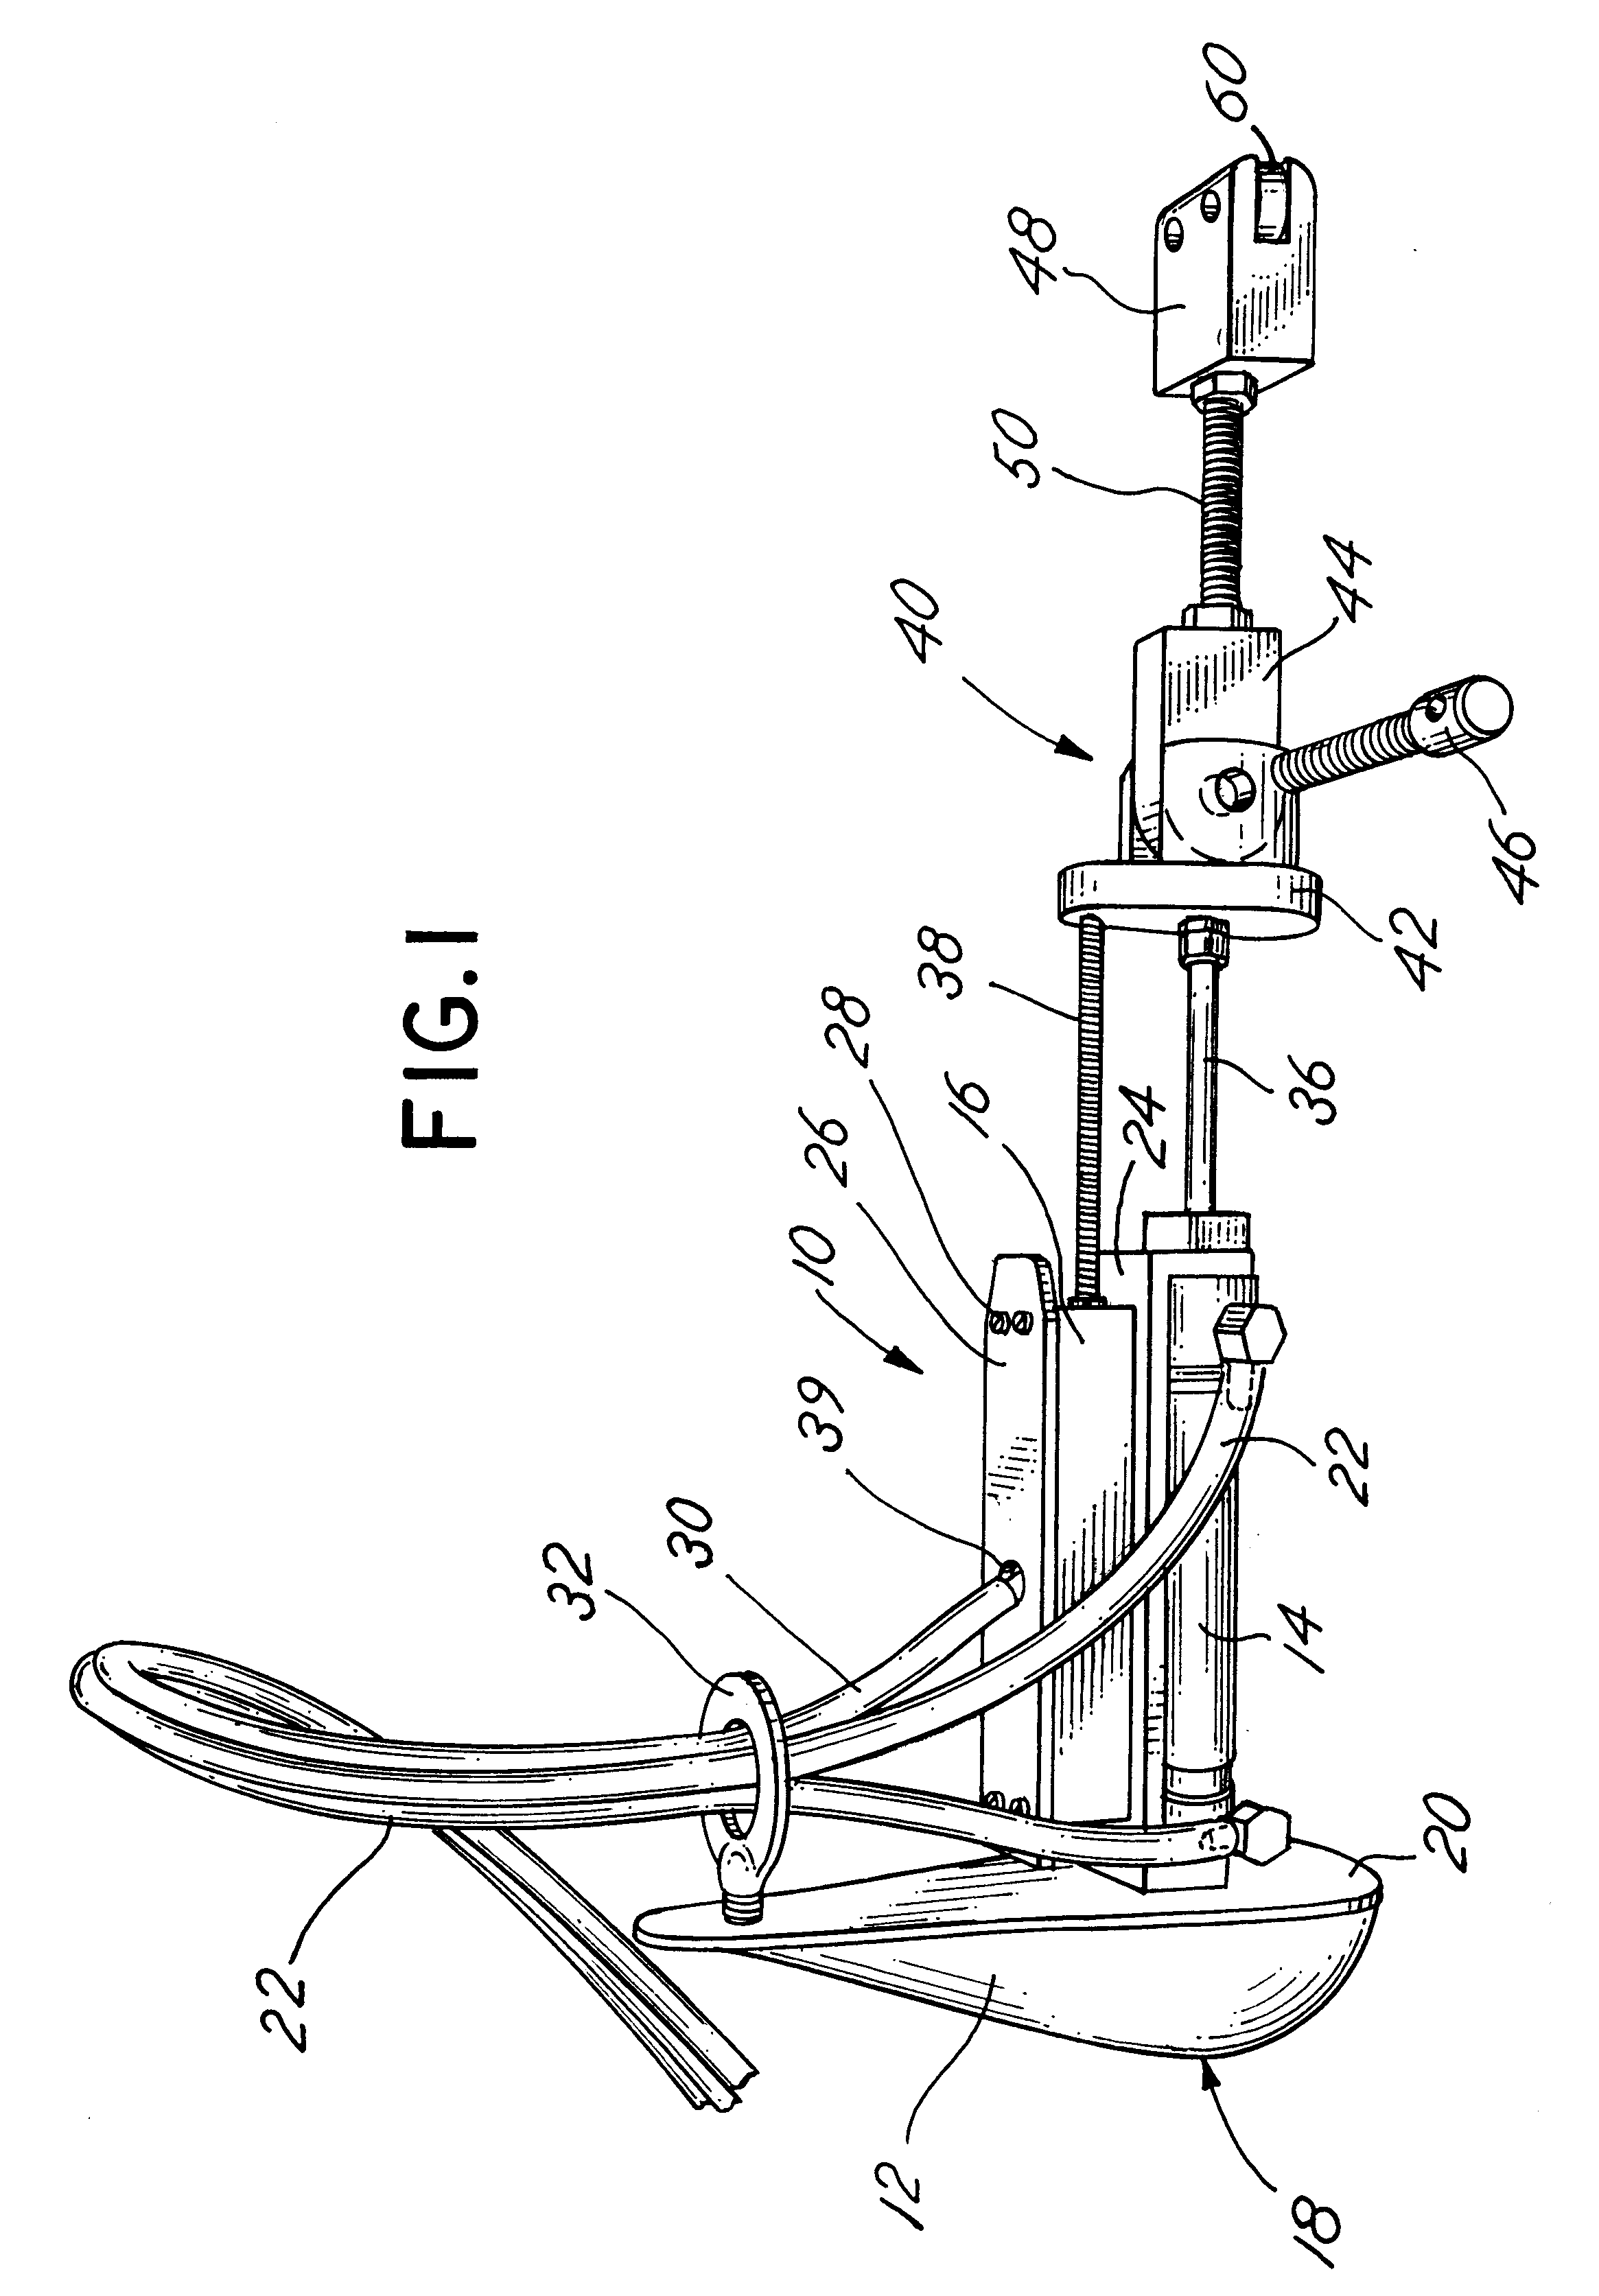 Internal shoe sizing apparatus and method for sizing shoes